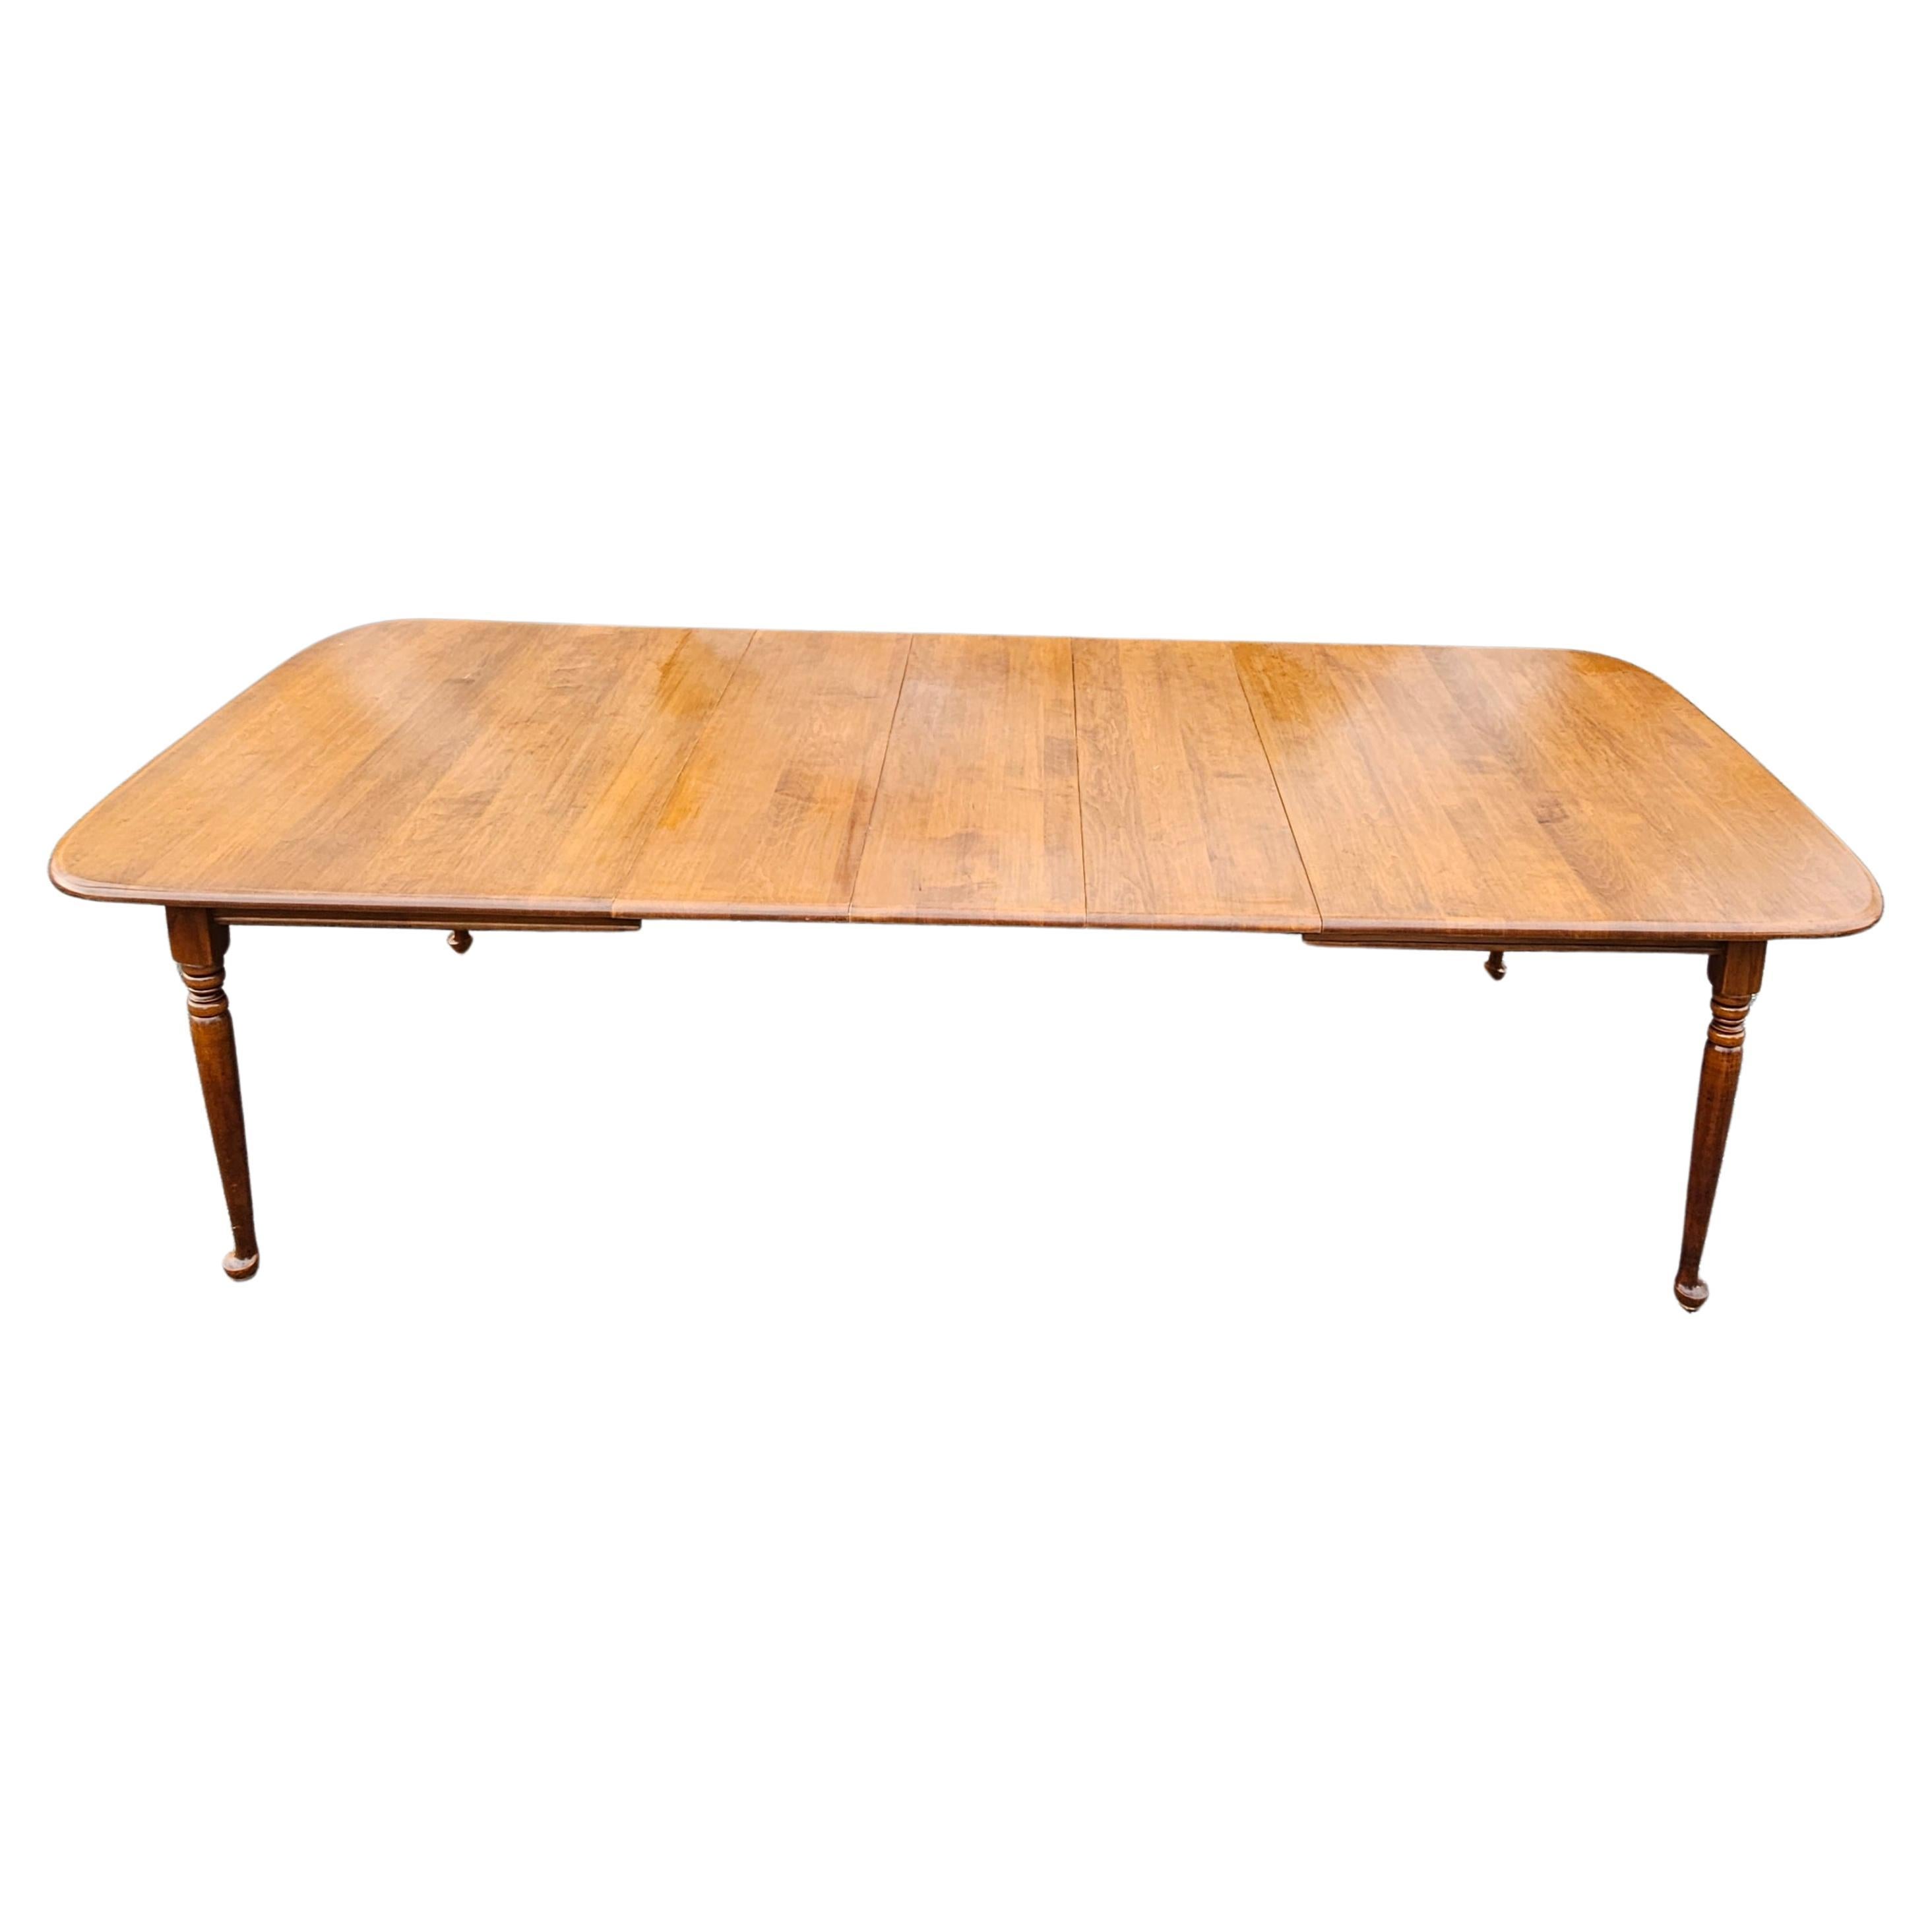 20th Century Heywood Wakefield Maple Cinnamon Colonial Style Extension Dining Table For Sale